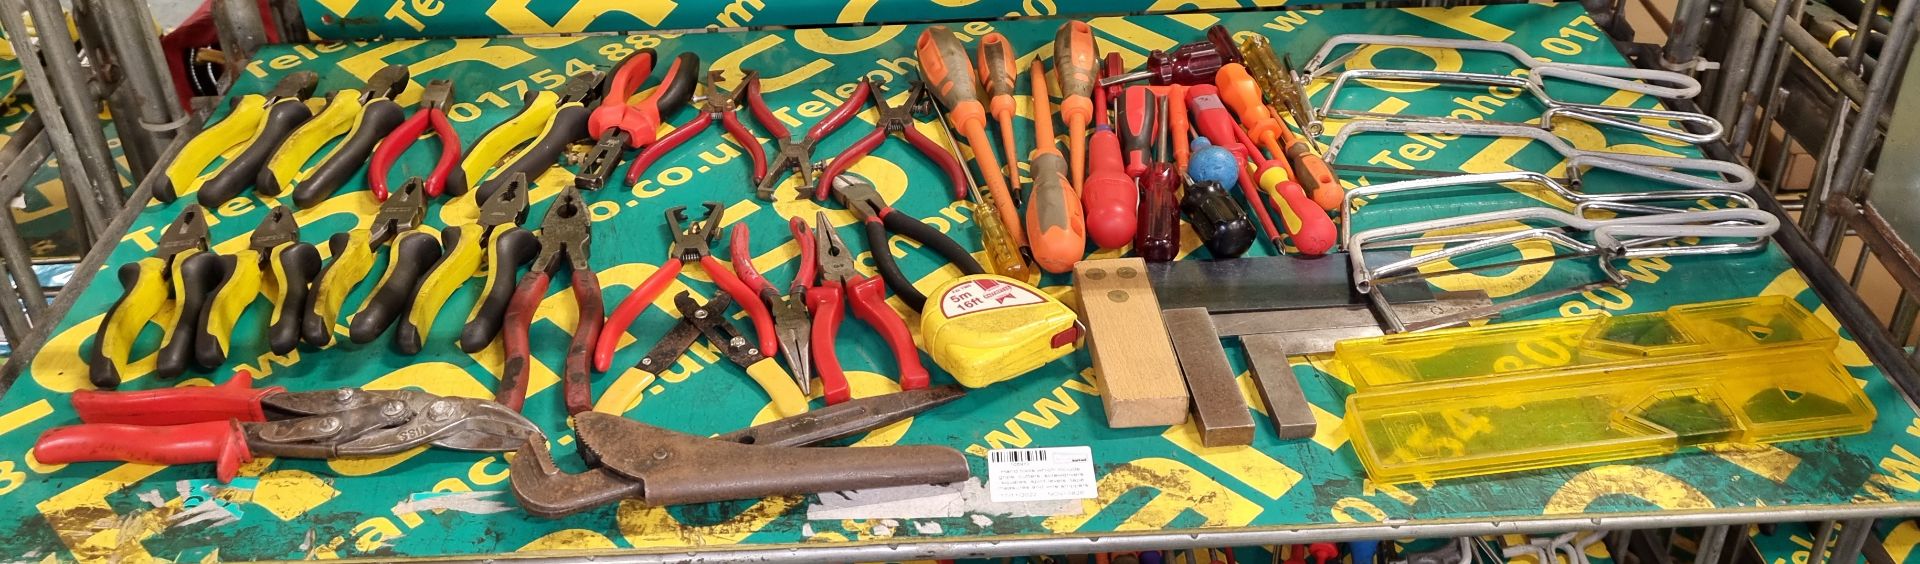 Hand tools - grips, cutters, screwdrivers, squares, spirit levels, tape measures, wire strippers